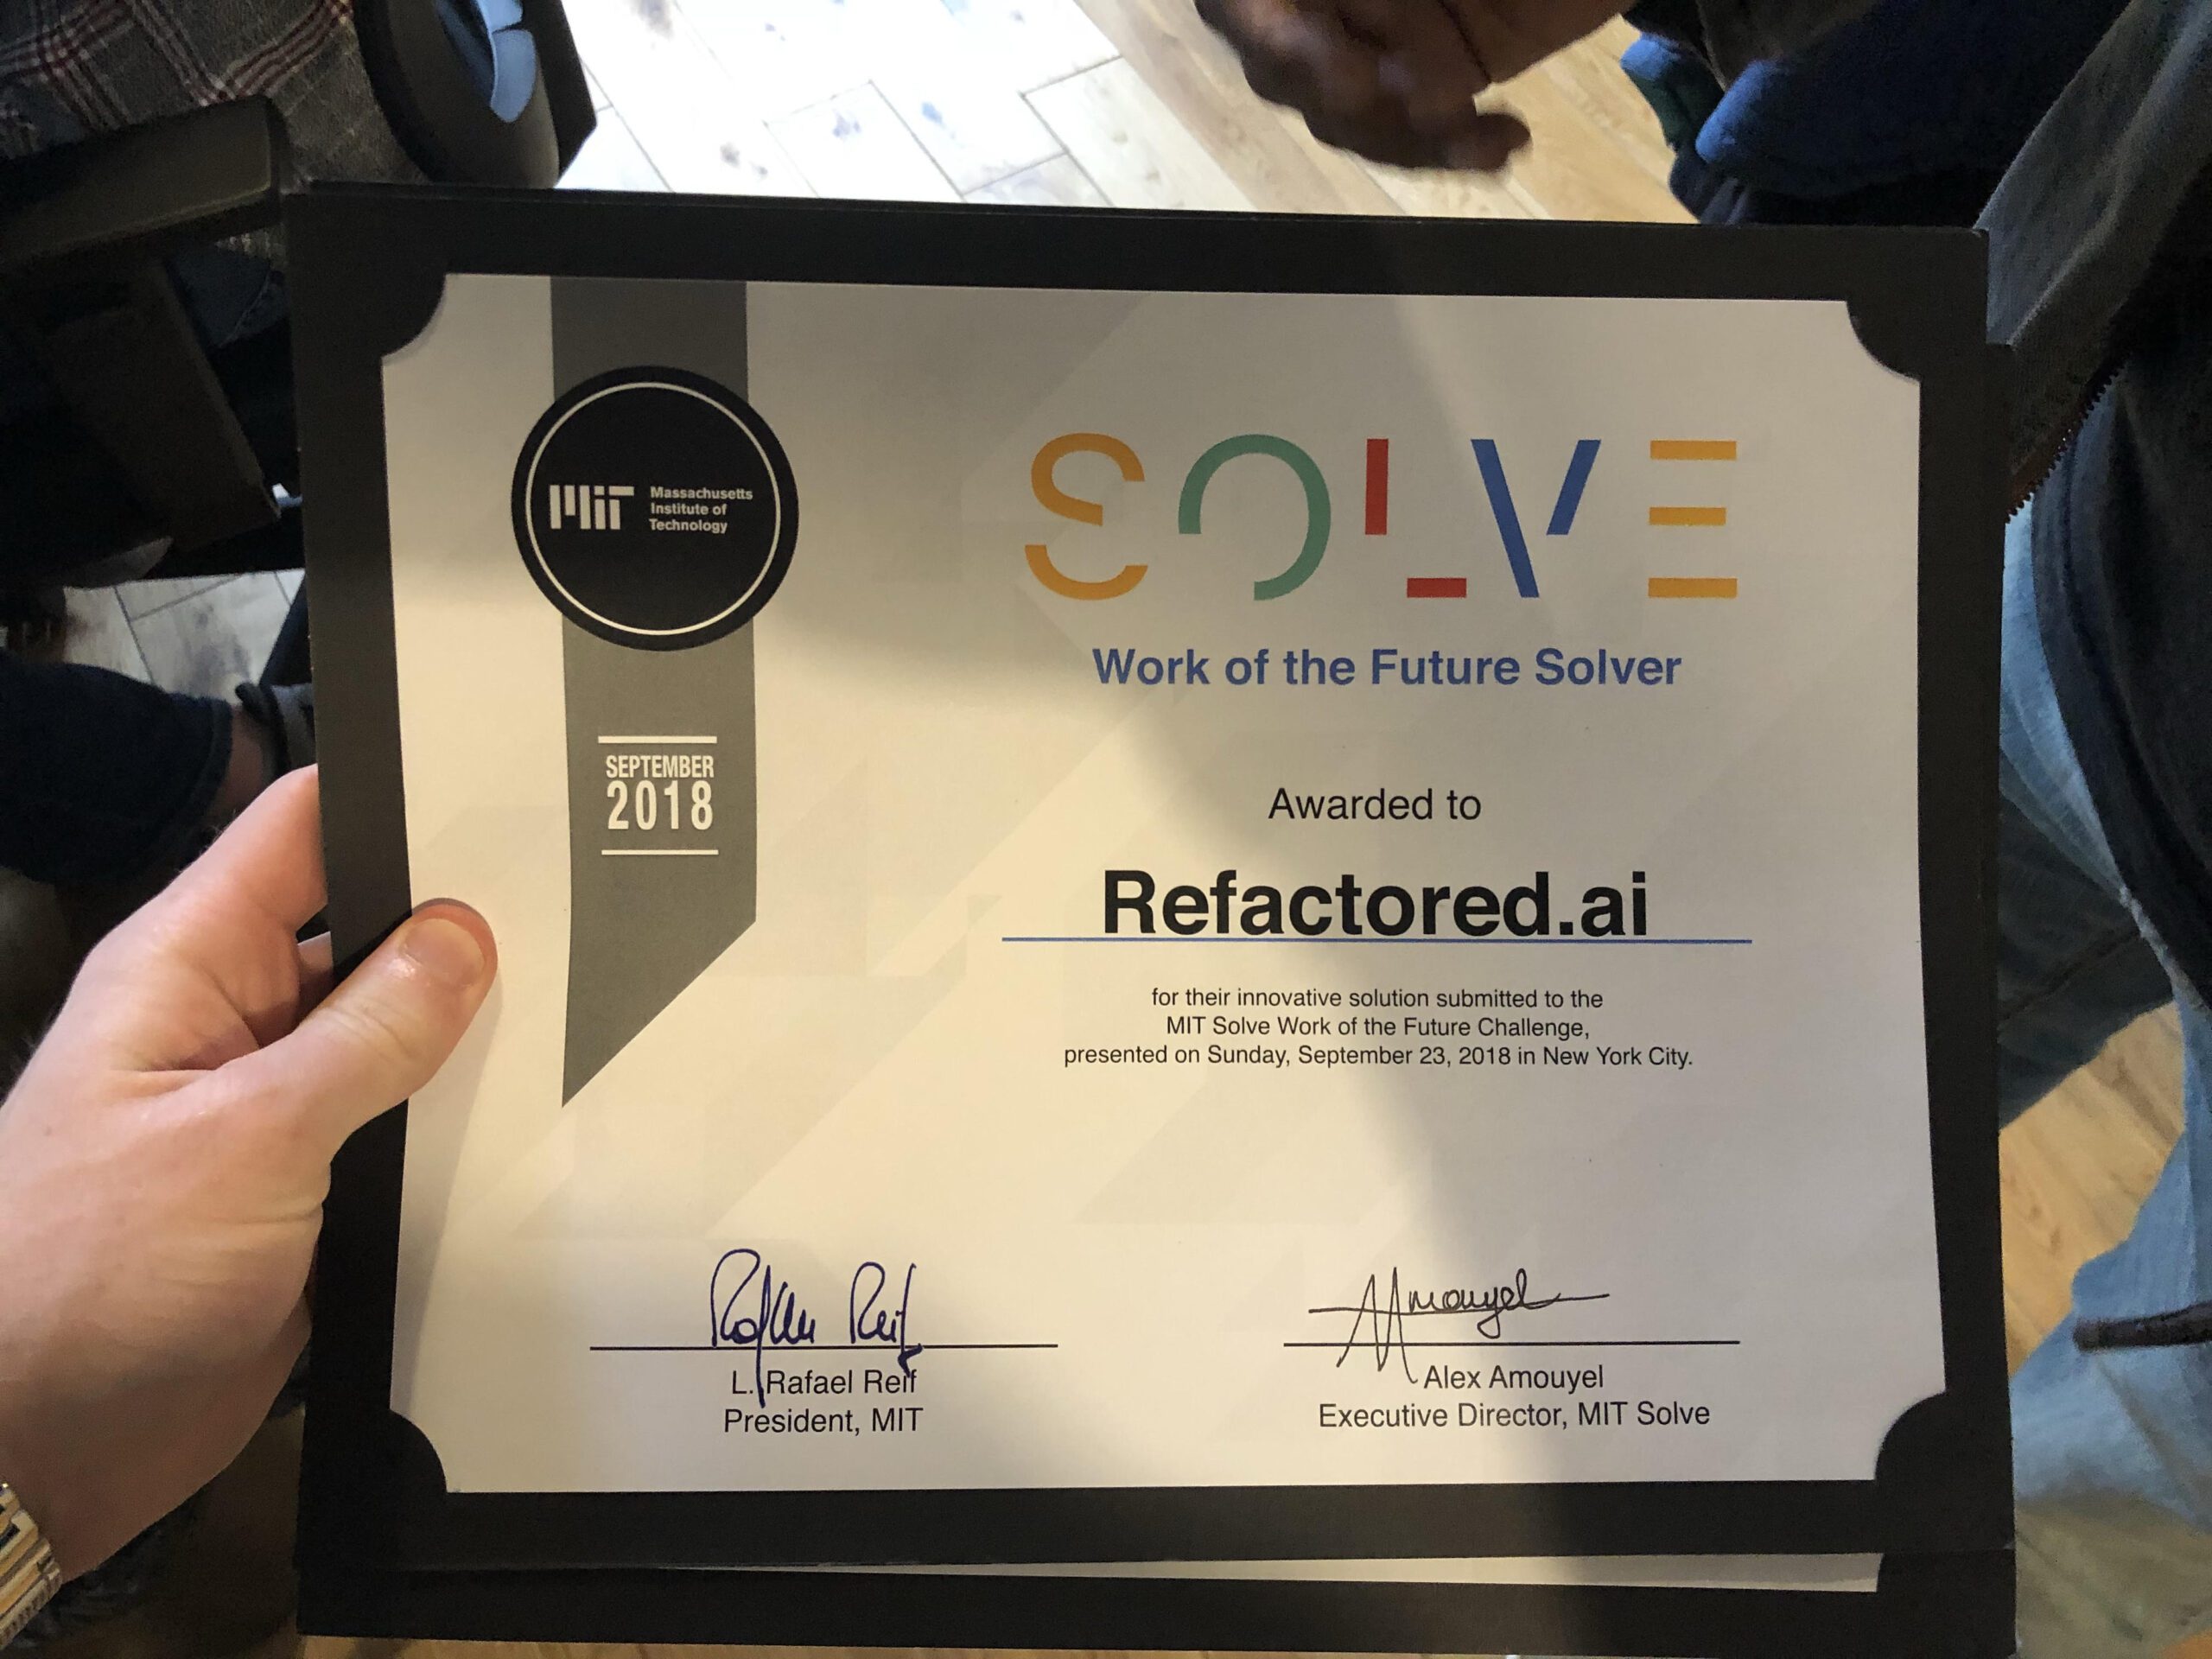 Image of certificate for MIT SOLVE Work of the Future Solver awarded to Refactored.ai 2018